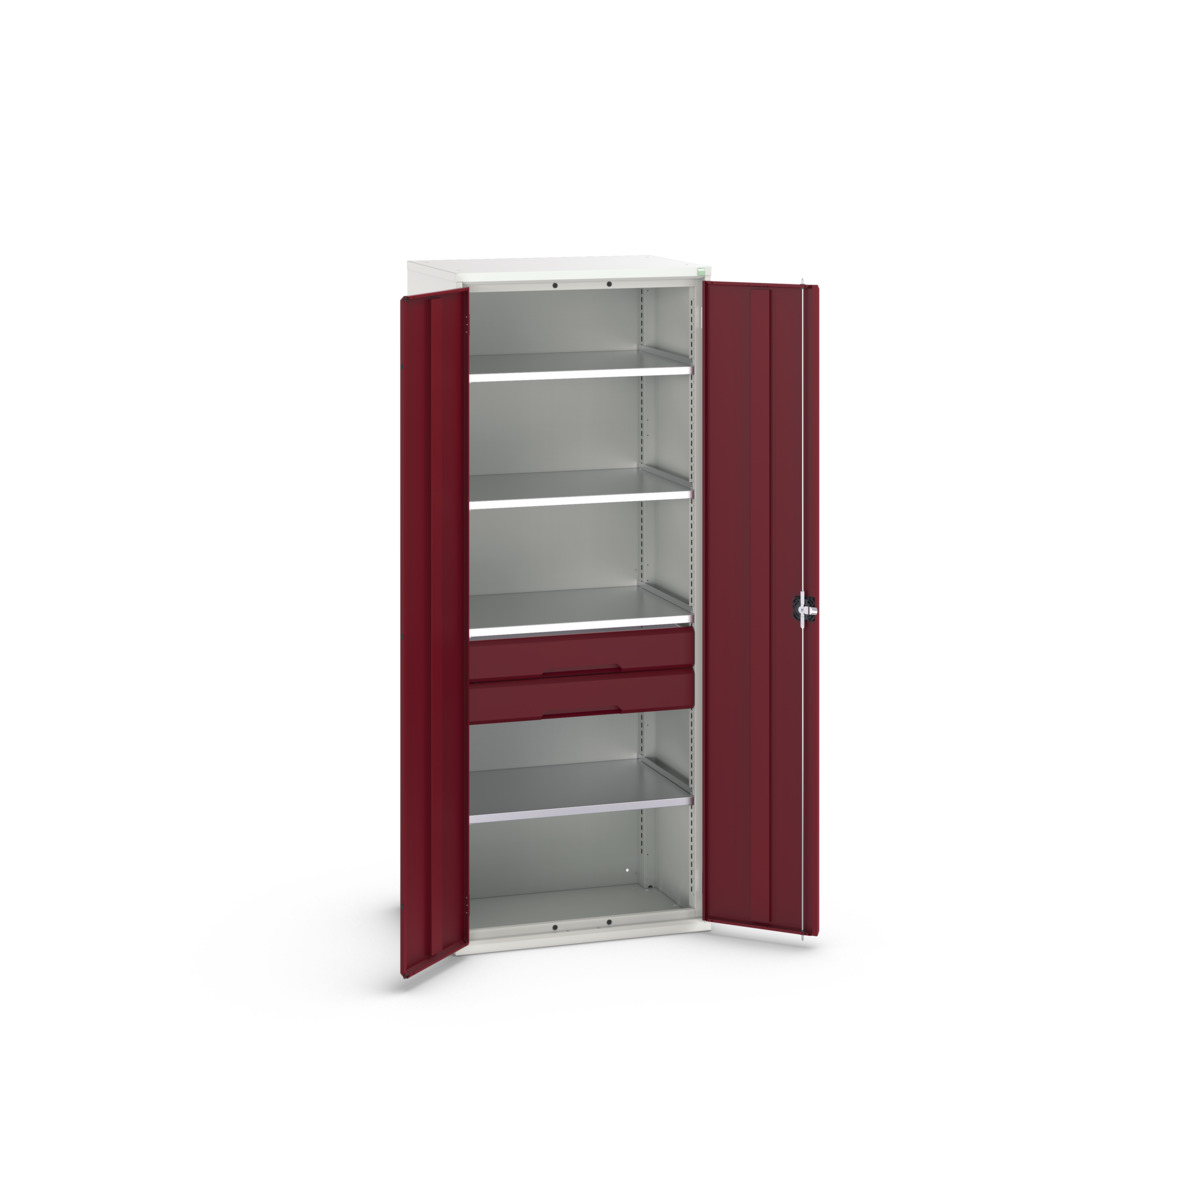 16926455.24 - verso kitted cupboard